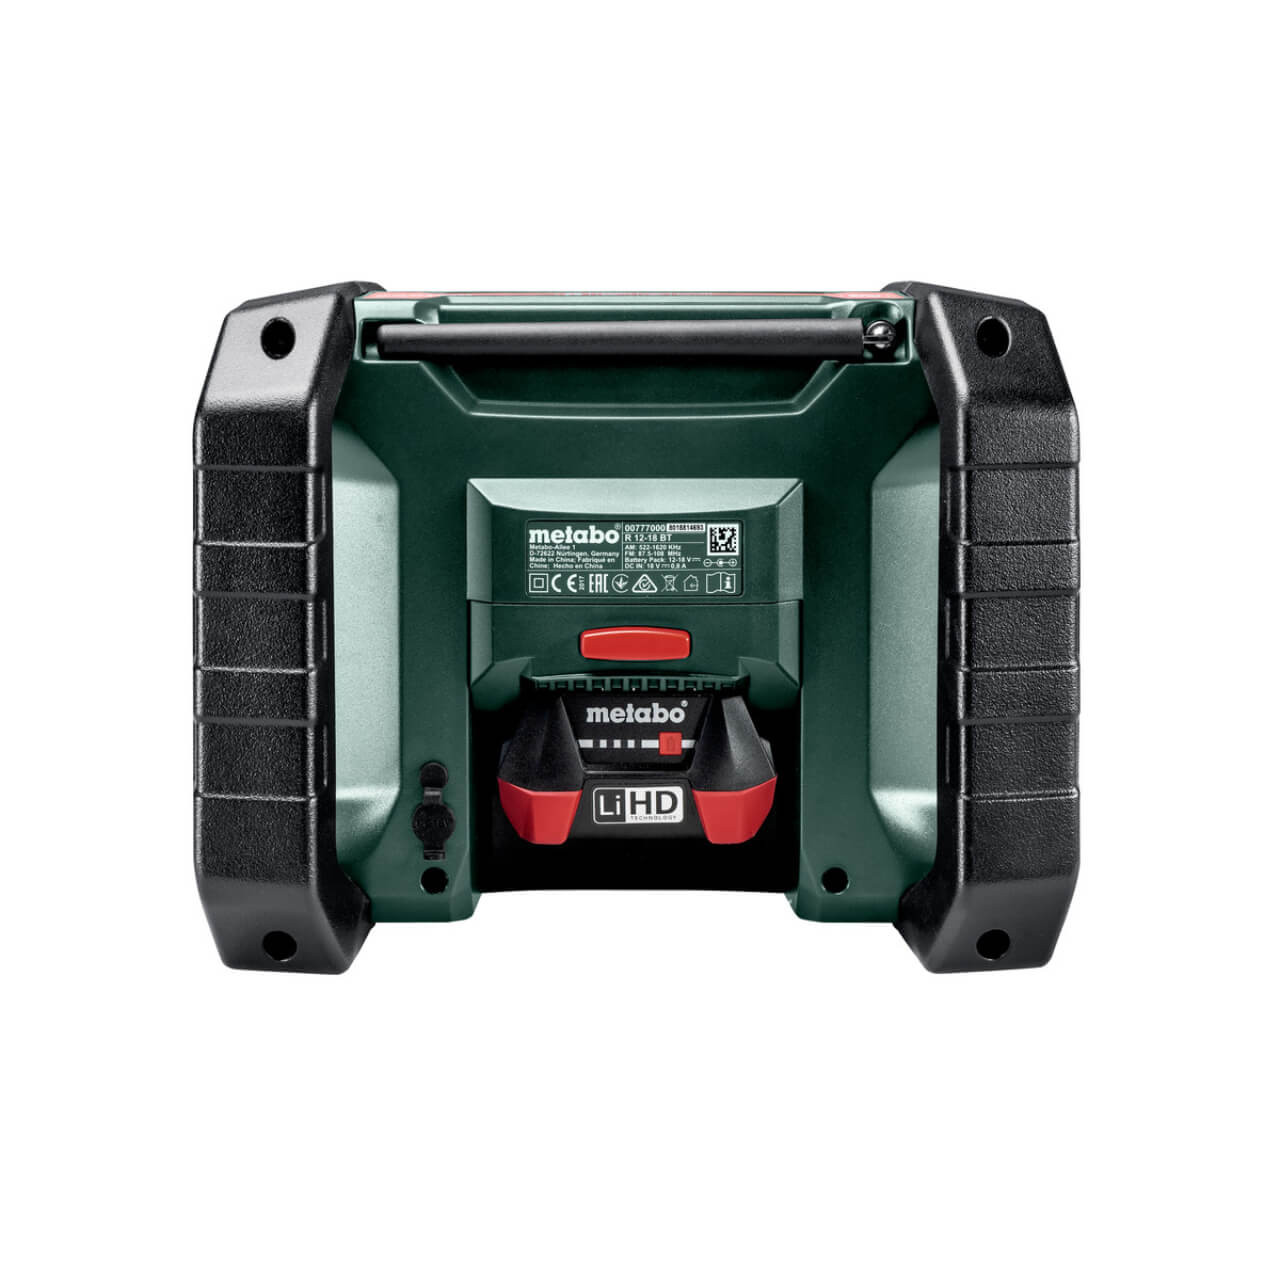 Metabo R 12-18 BT 12V/18V Compact AM/FM worksite radio with Bluetooth - Skin Only